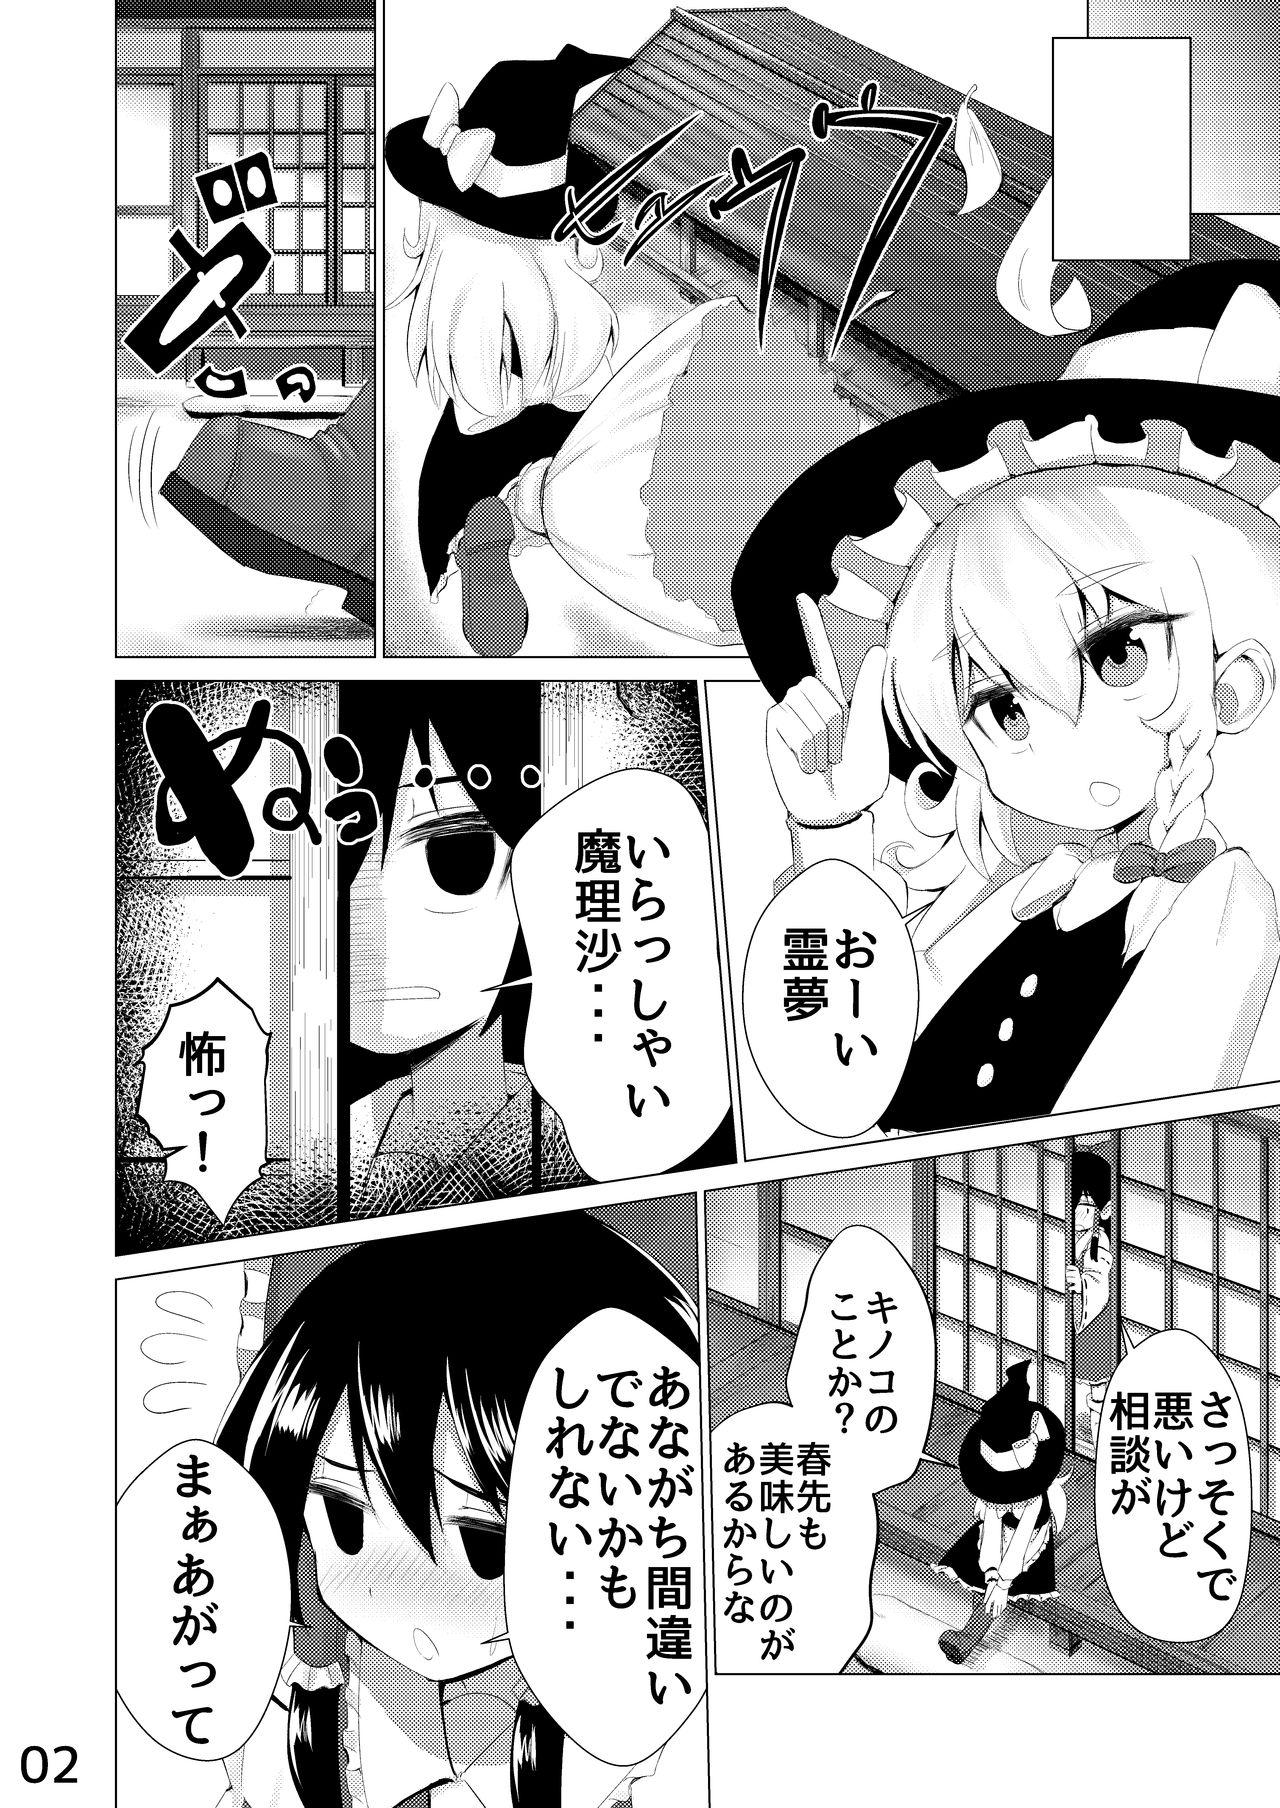 Gay Outinpublic [NO相撲KING (吸斬) 生えた (Touhou Project) [Digital] - Touhou project Compilation - Page 3